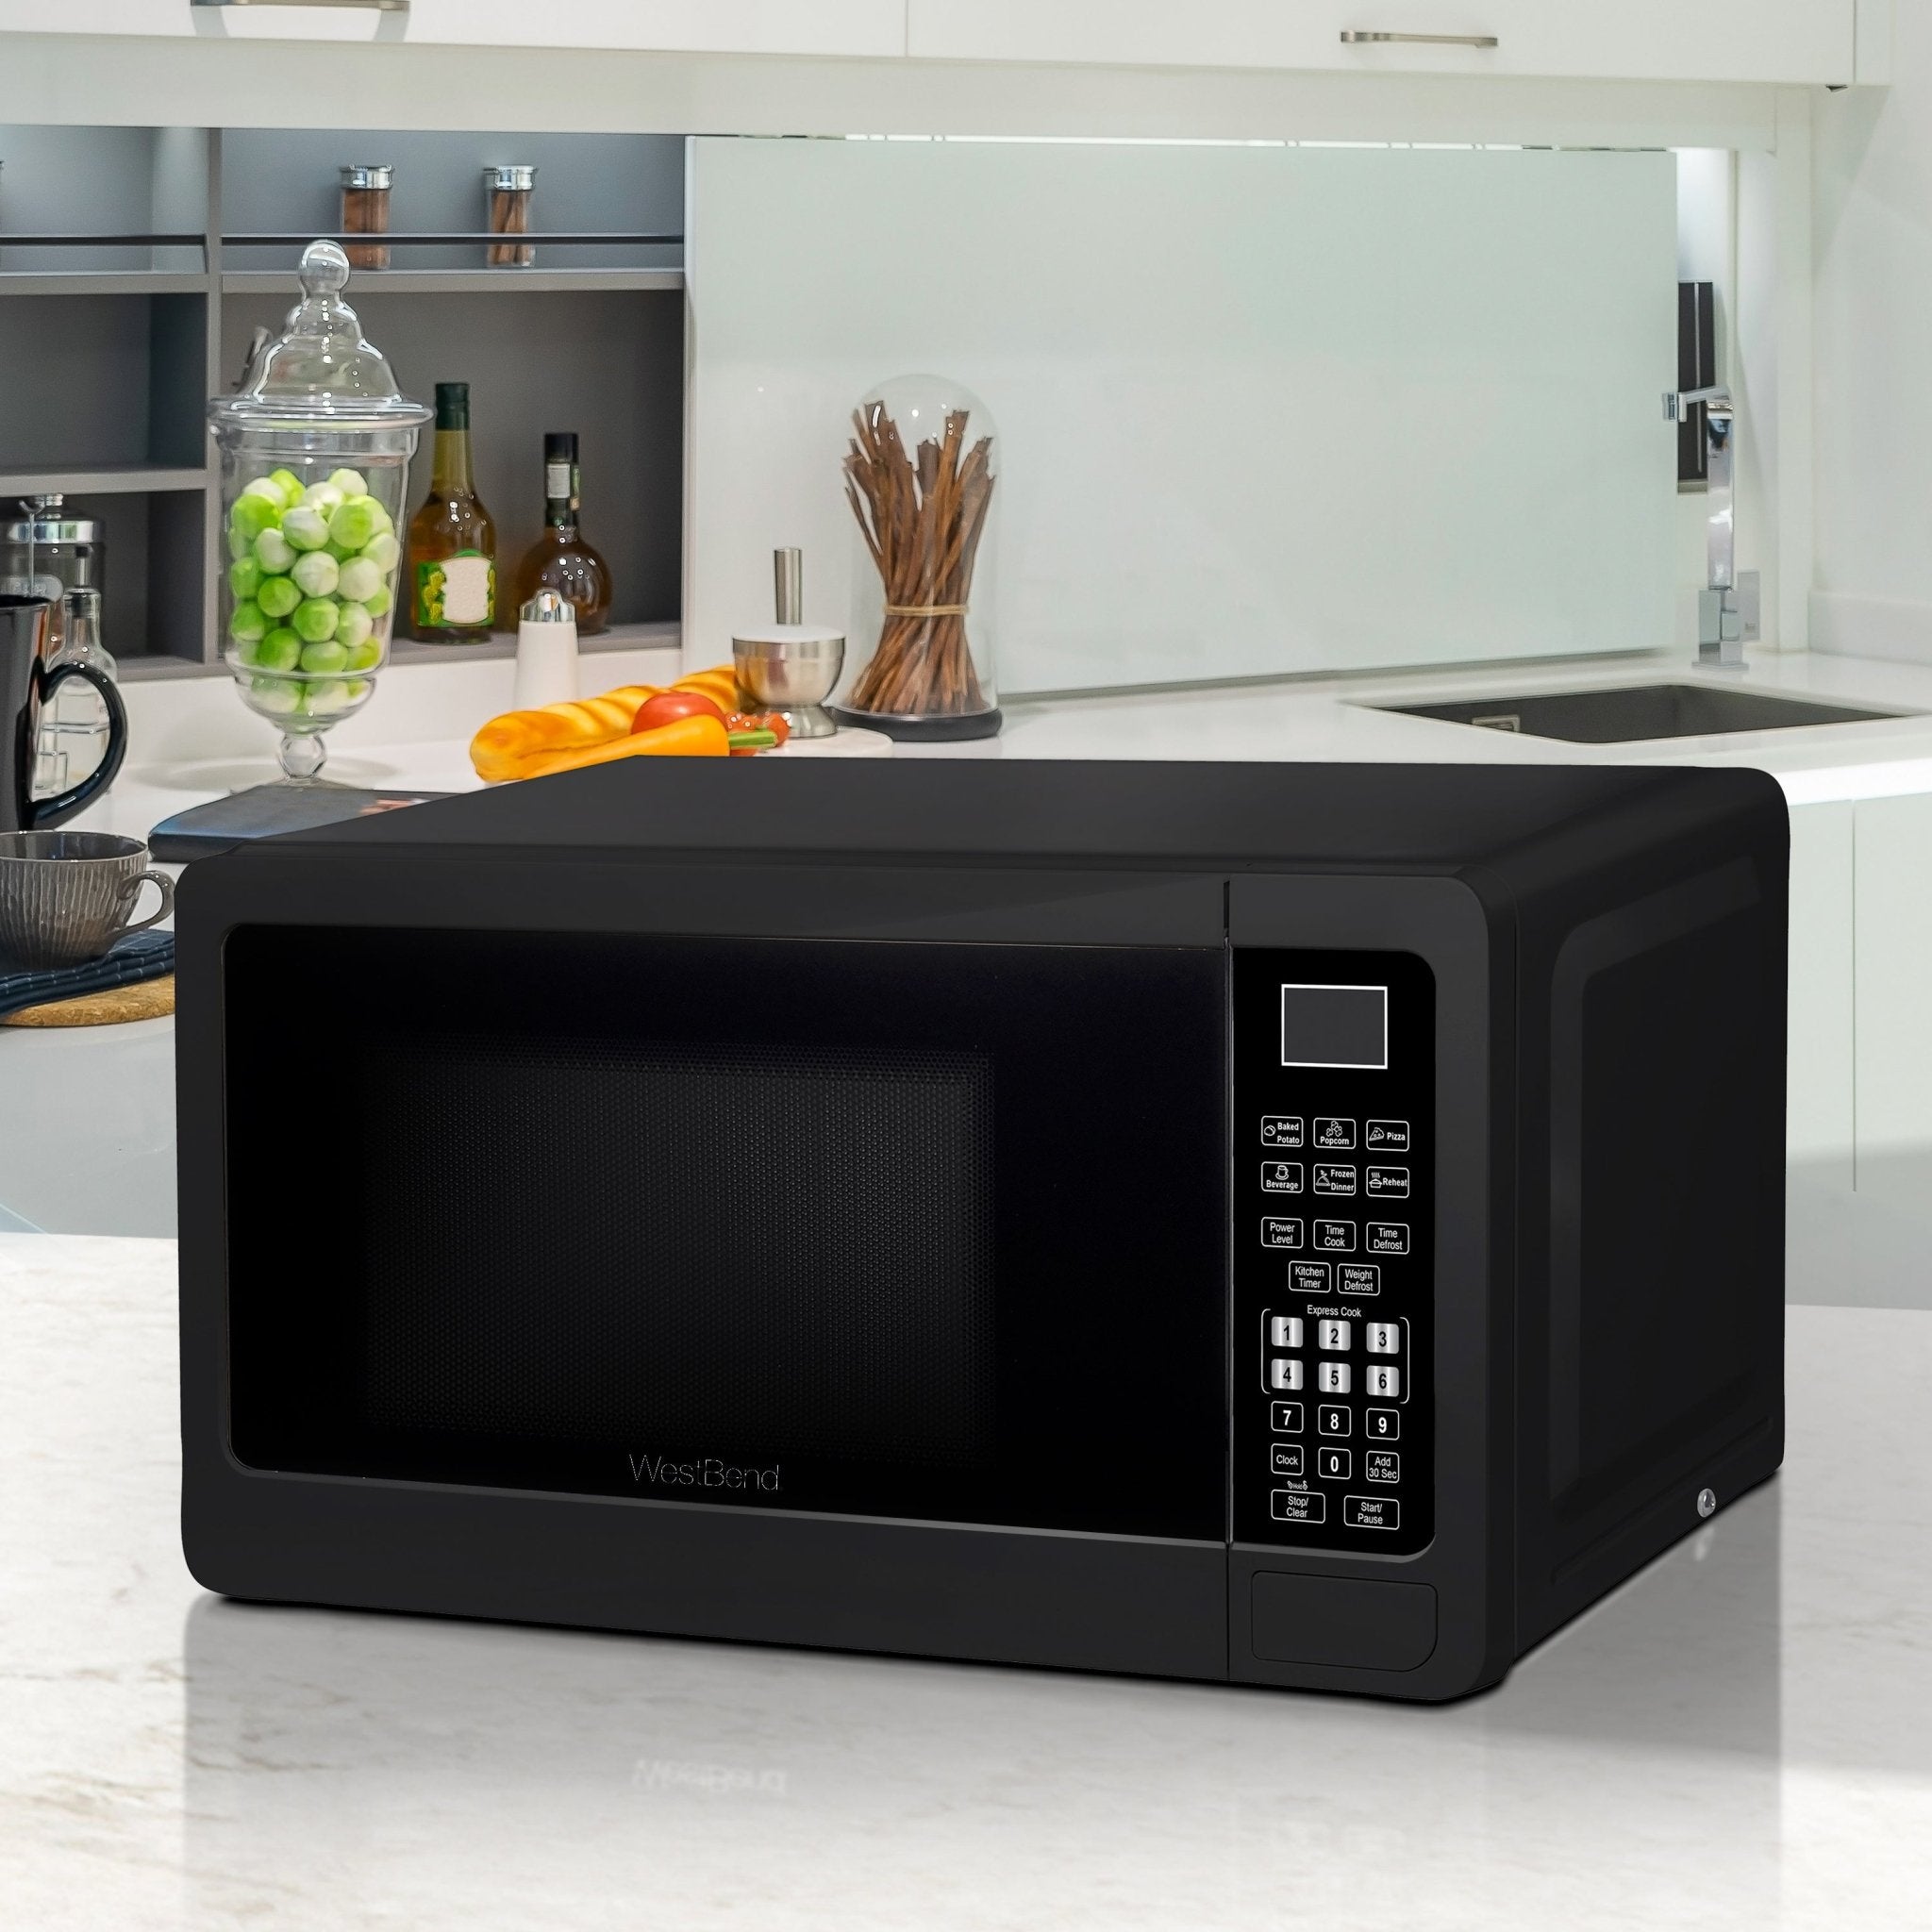 West Bend 0.7 cu. ft. Microwave Oven, in Black (WBMW71B)